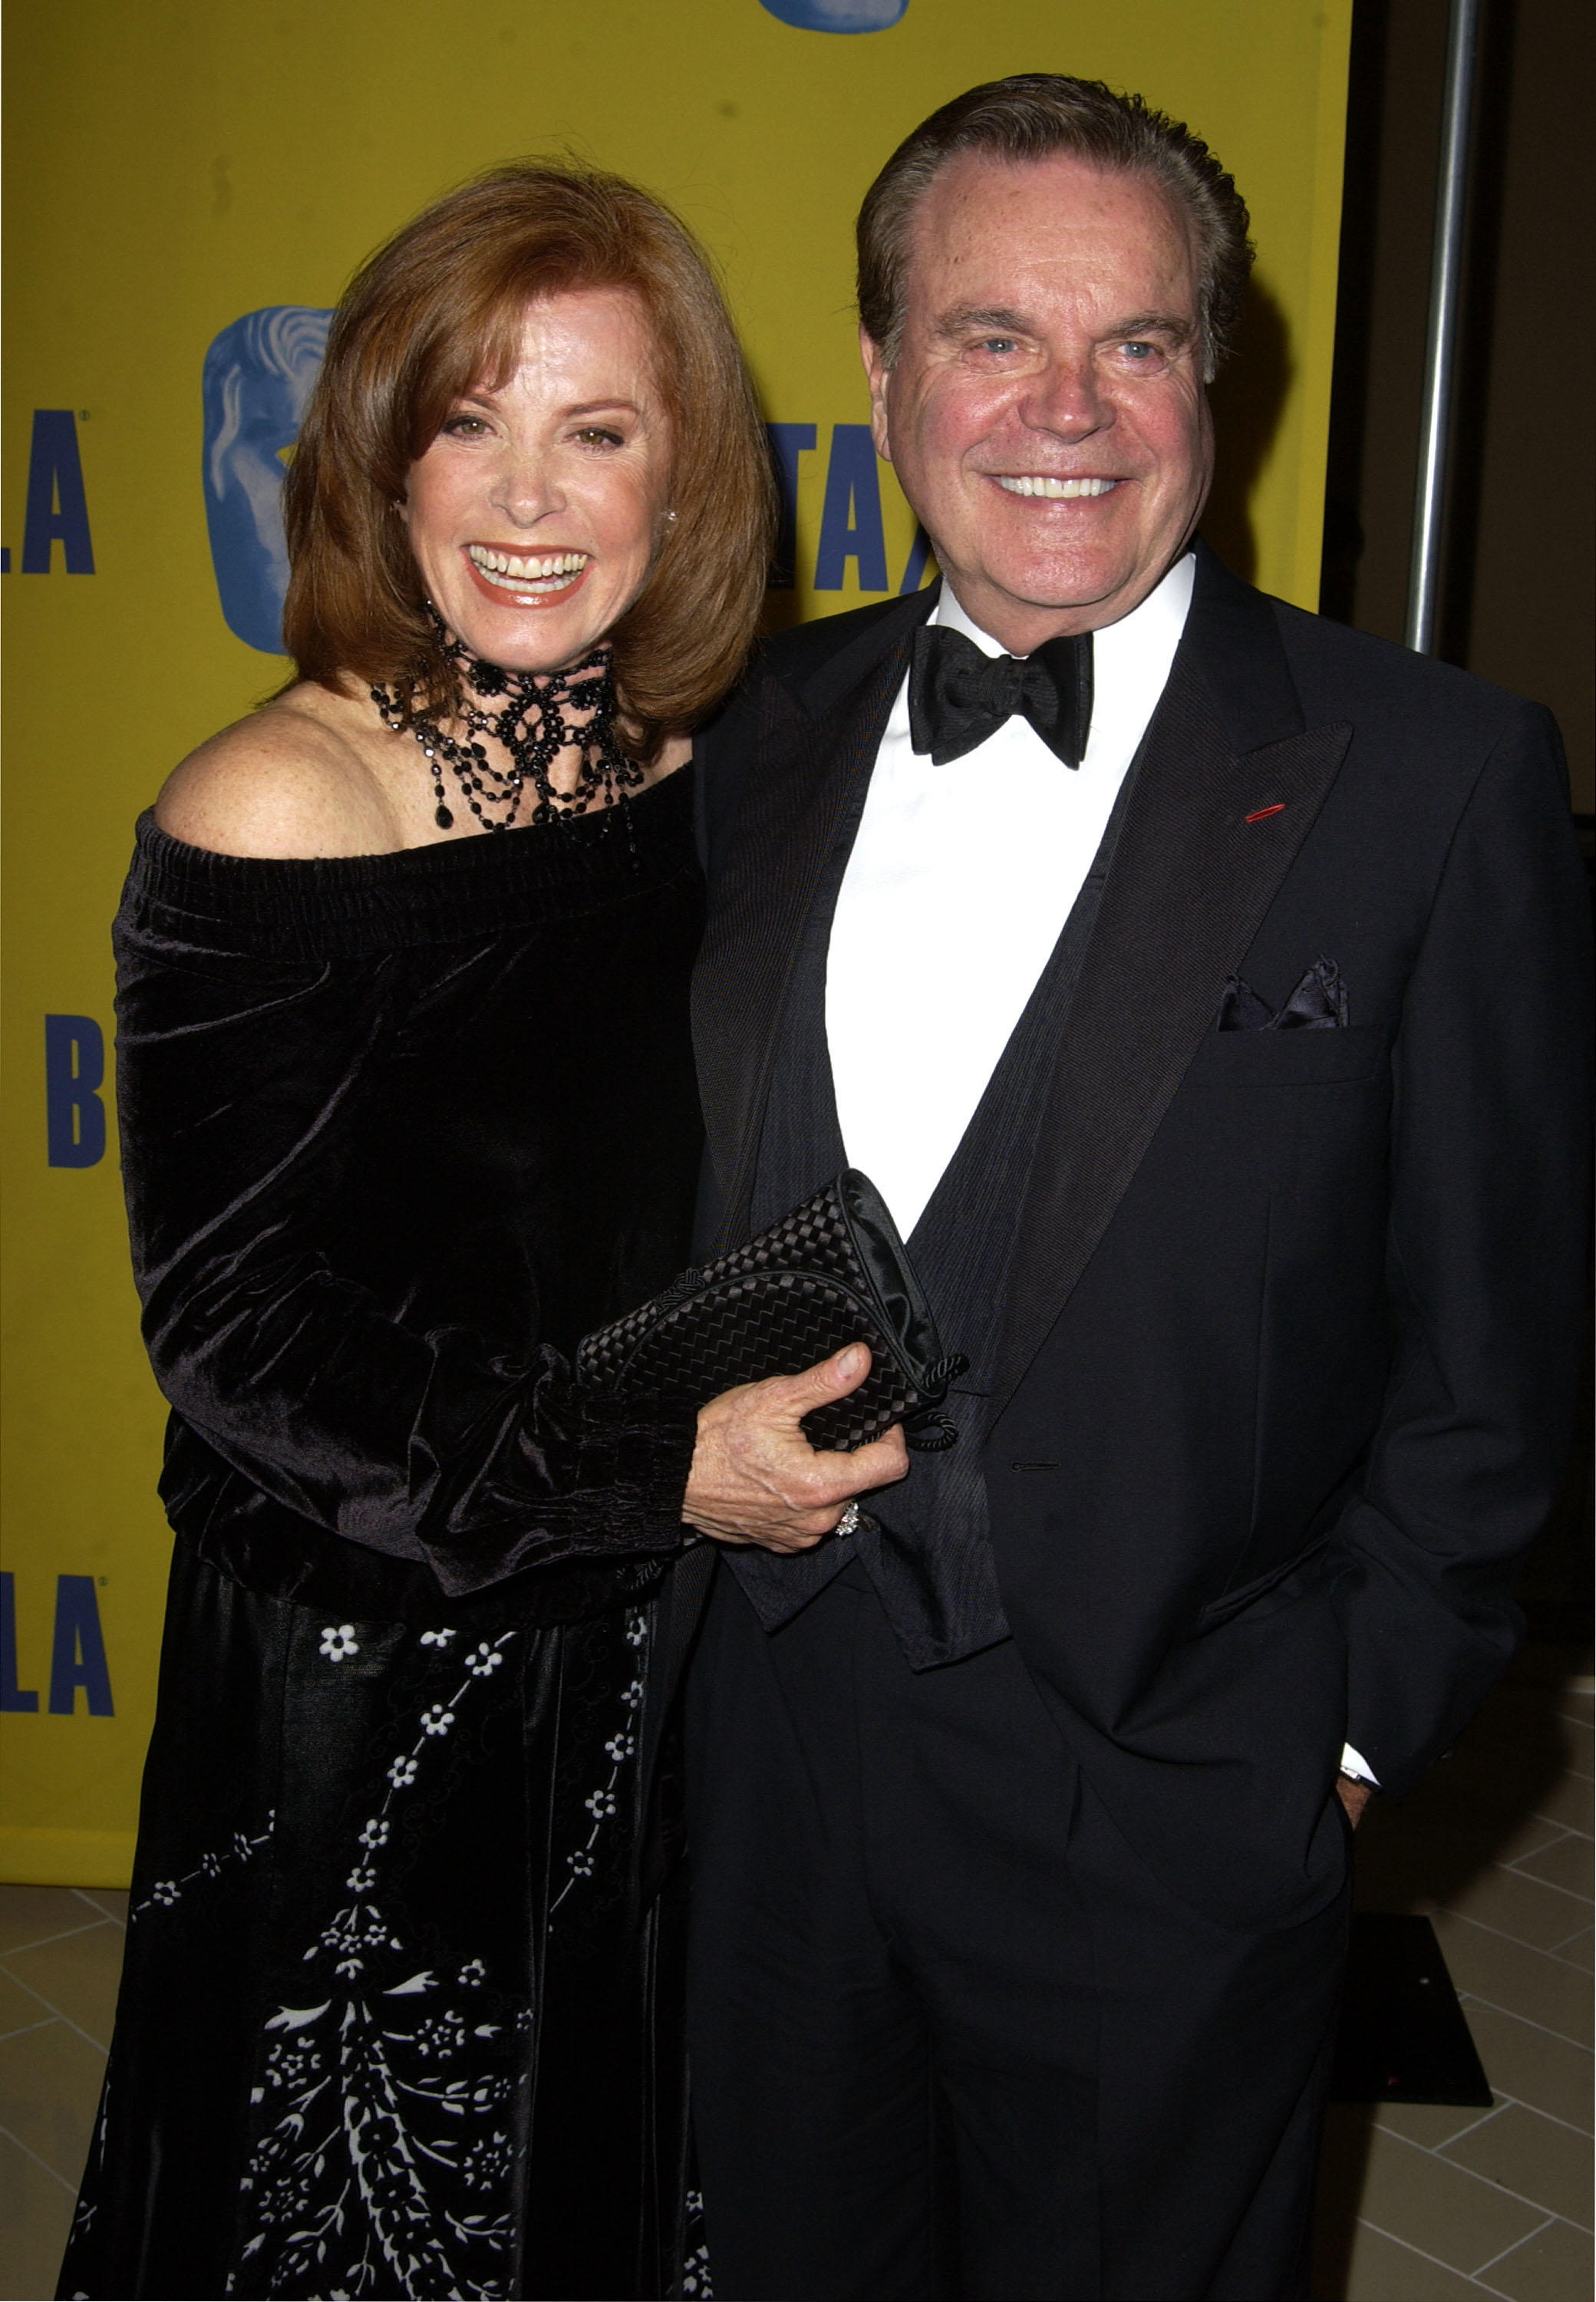 Stefanie Powers and Robert Wagner during 12th Annual BAFTA/LA Britannia Awards at Century Plaza Hotel in Century City, California, United States | Source: Getty Images